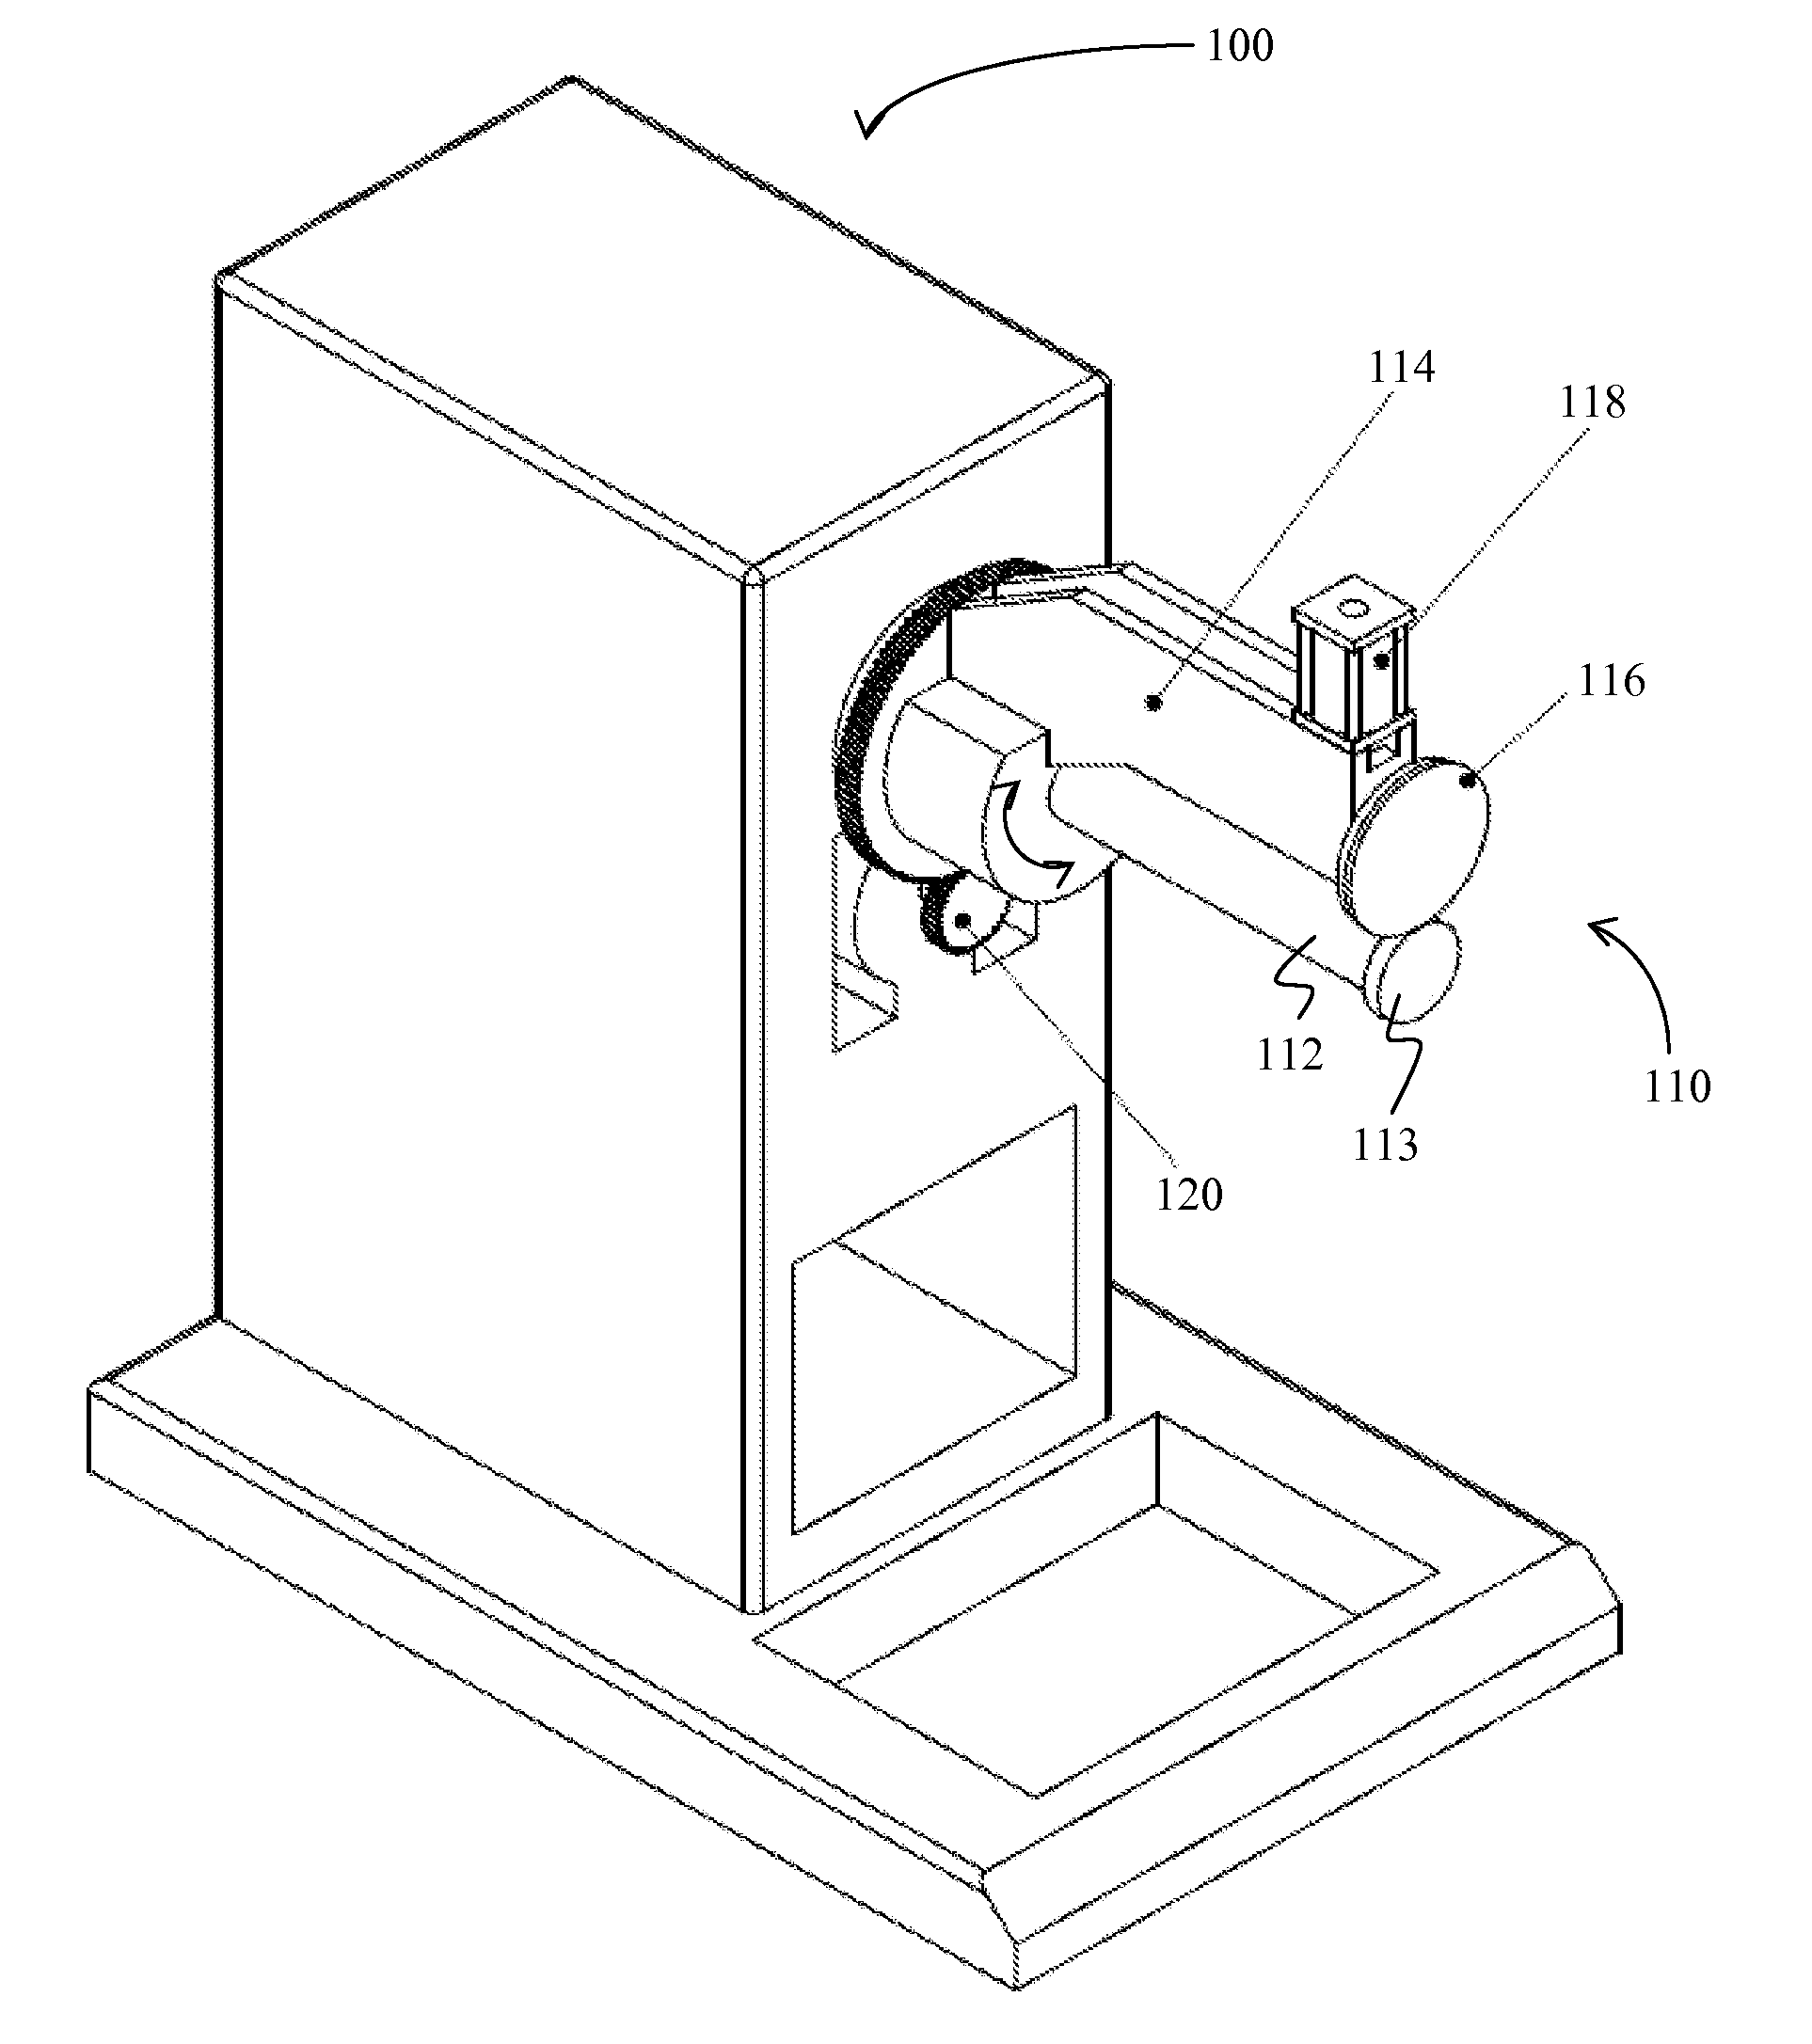 Planetary Resistance Welding Device And Methods Therefor